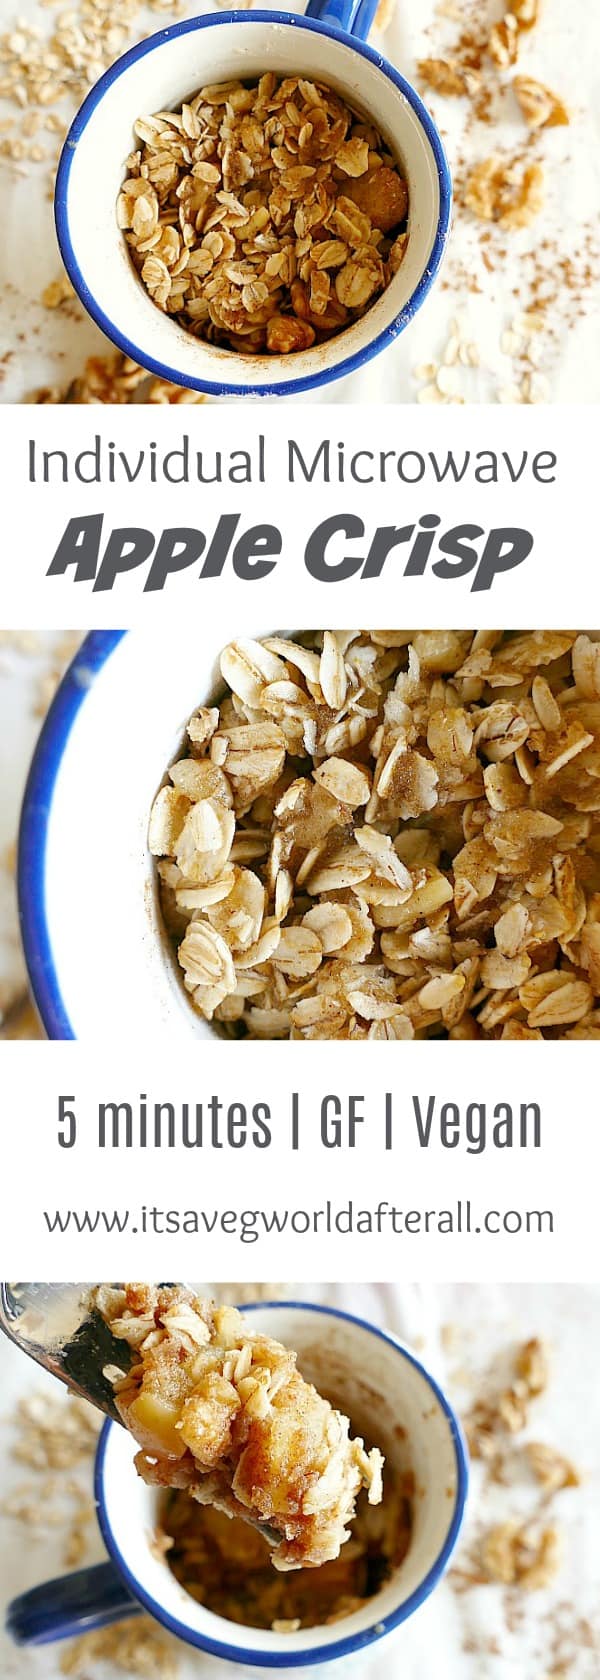 images of single-serve apple crisp separated by text boxes for Pinterest